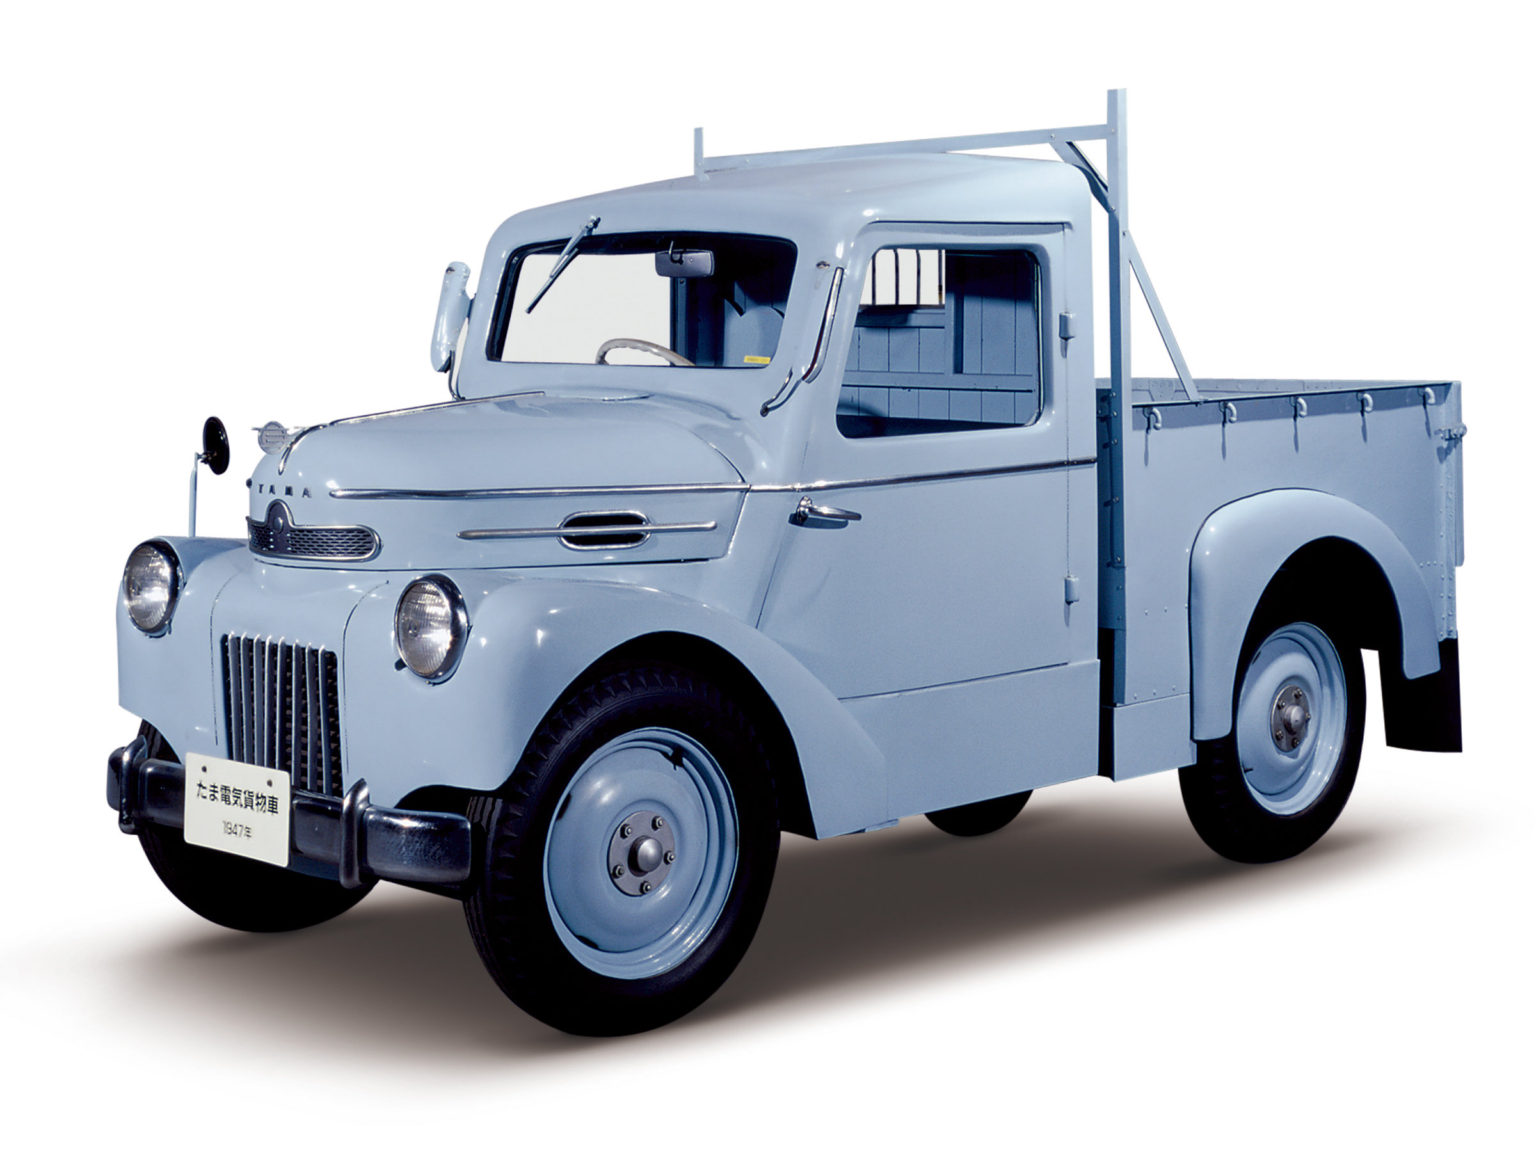 The Tama Truck is just one of the models Nissan keeps in its archives.